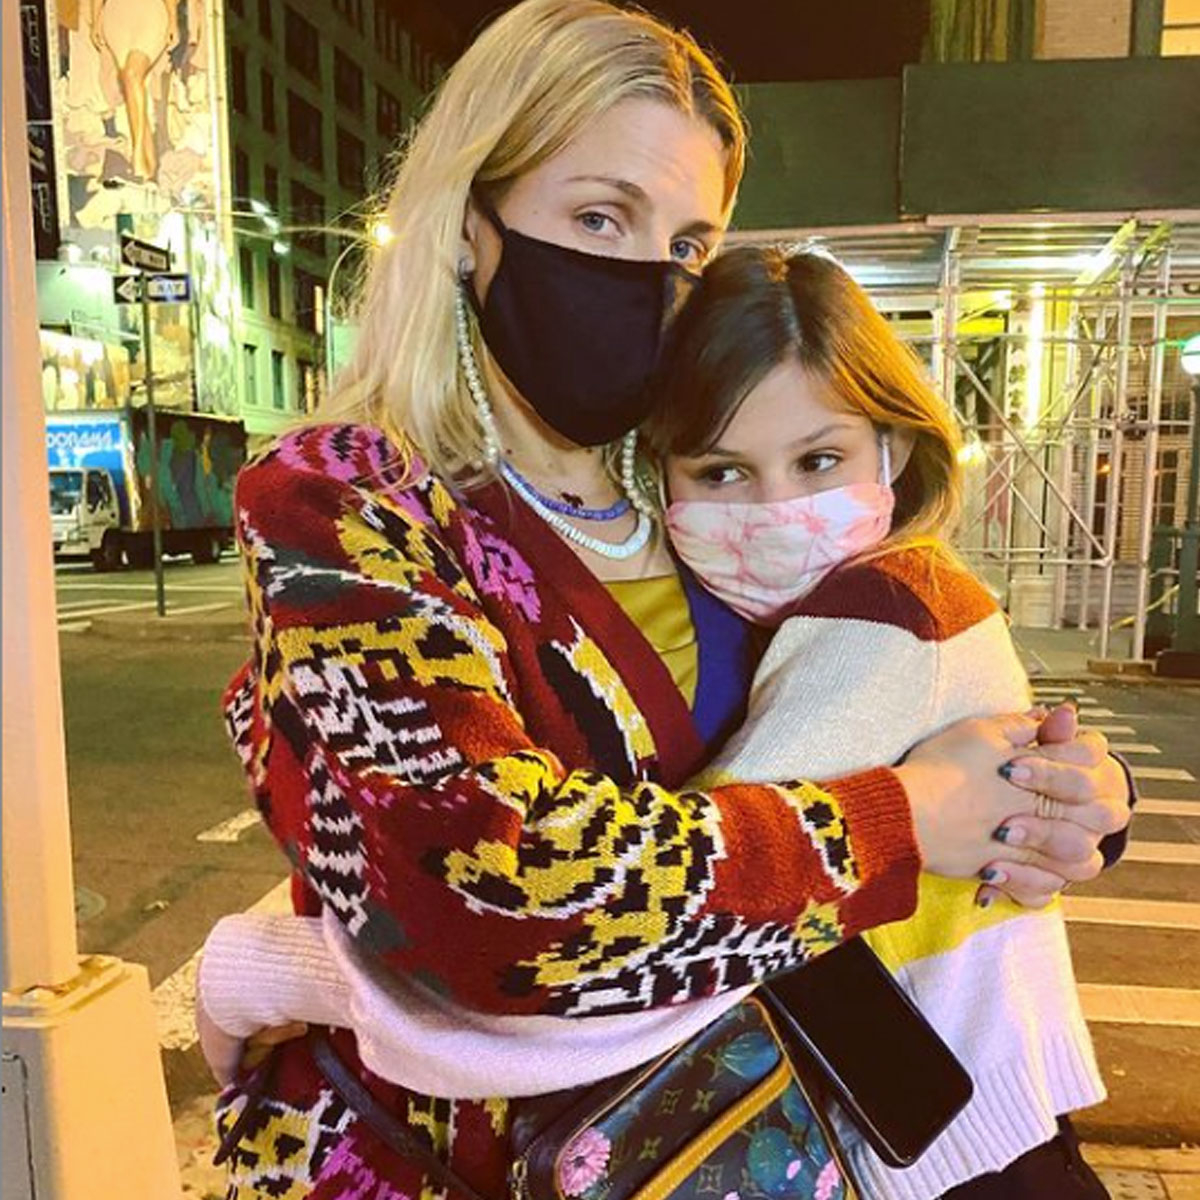 Busy Philipps shares her 12-year-old son, Birdie is gay